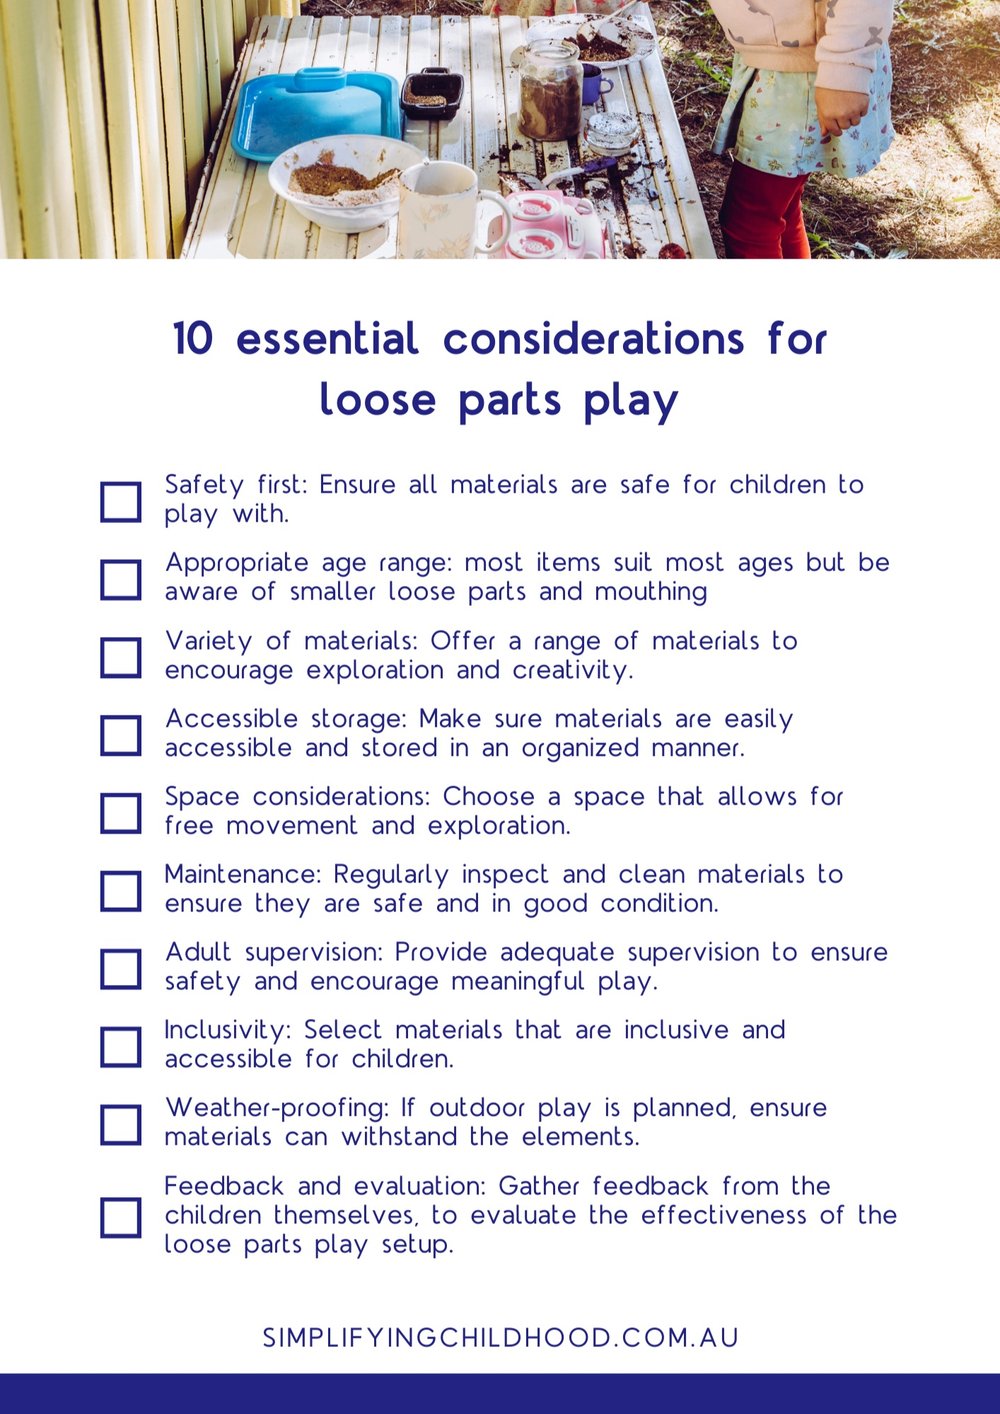 How to Guide to Loose Parts 